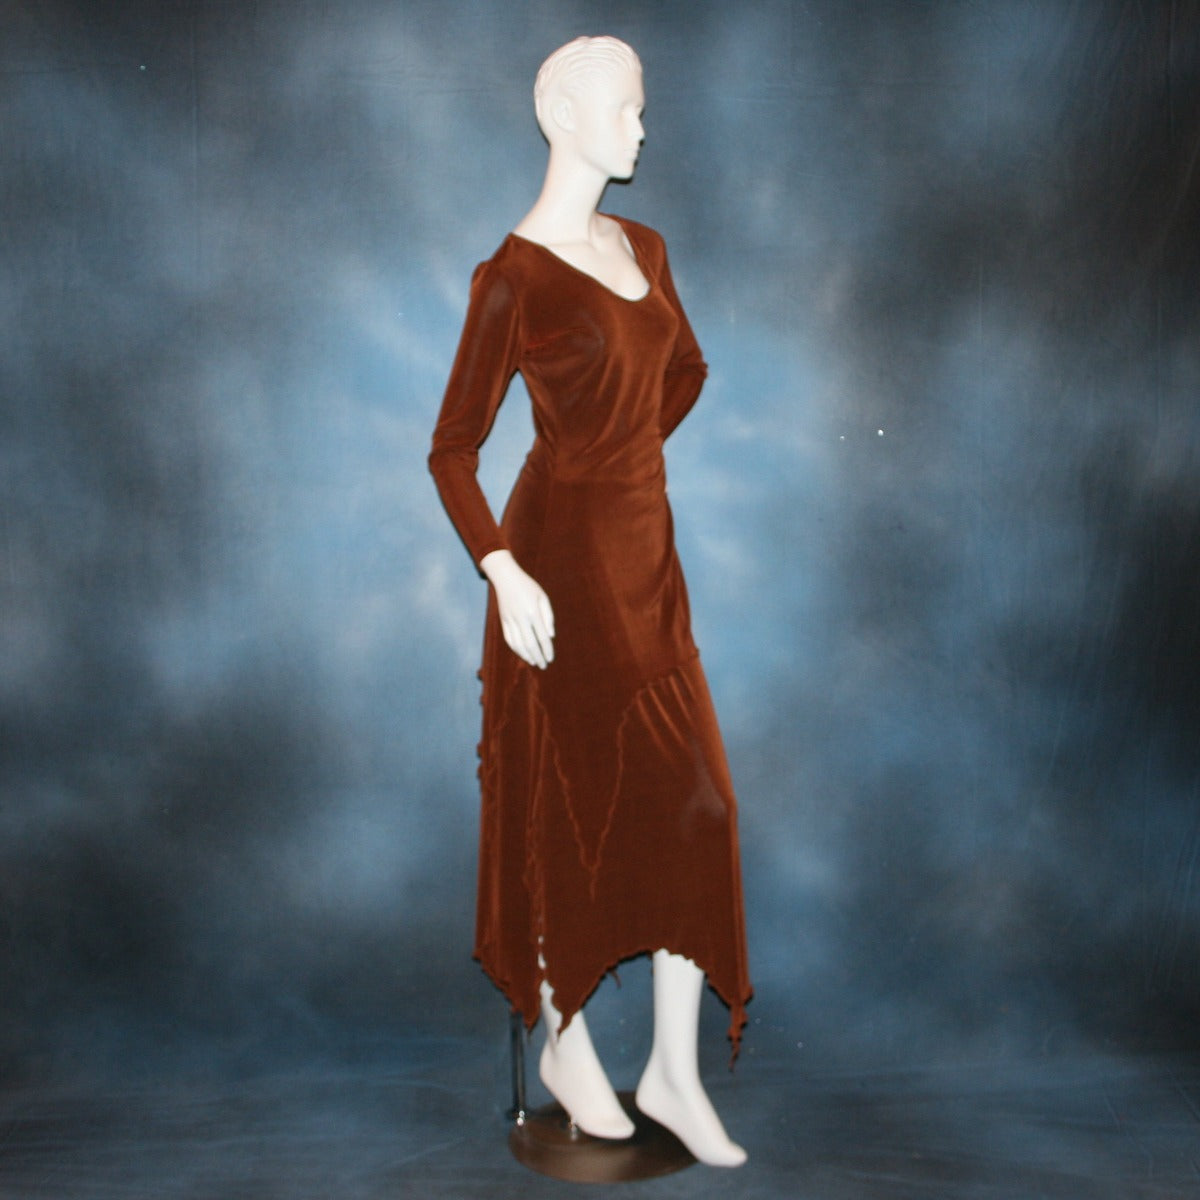 right side view of Cinnamon brown long sleeve angle cut tunic top includes A-line skirt with angle cuts of cinnamon brown colored solid slinky fabric, of which the tunic top can be worn as a simple Latin/rhythm dress... can be custom created in many colors.